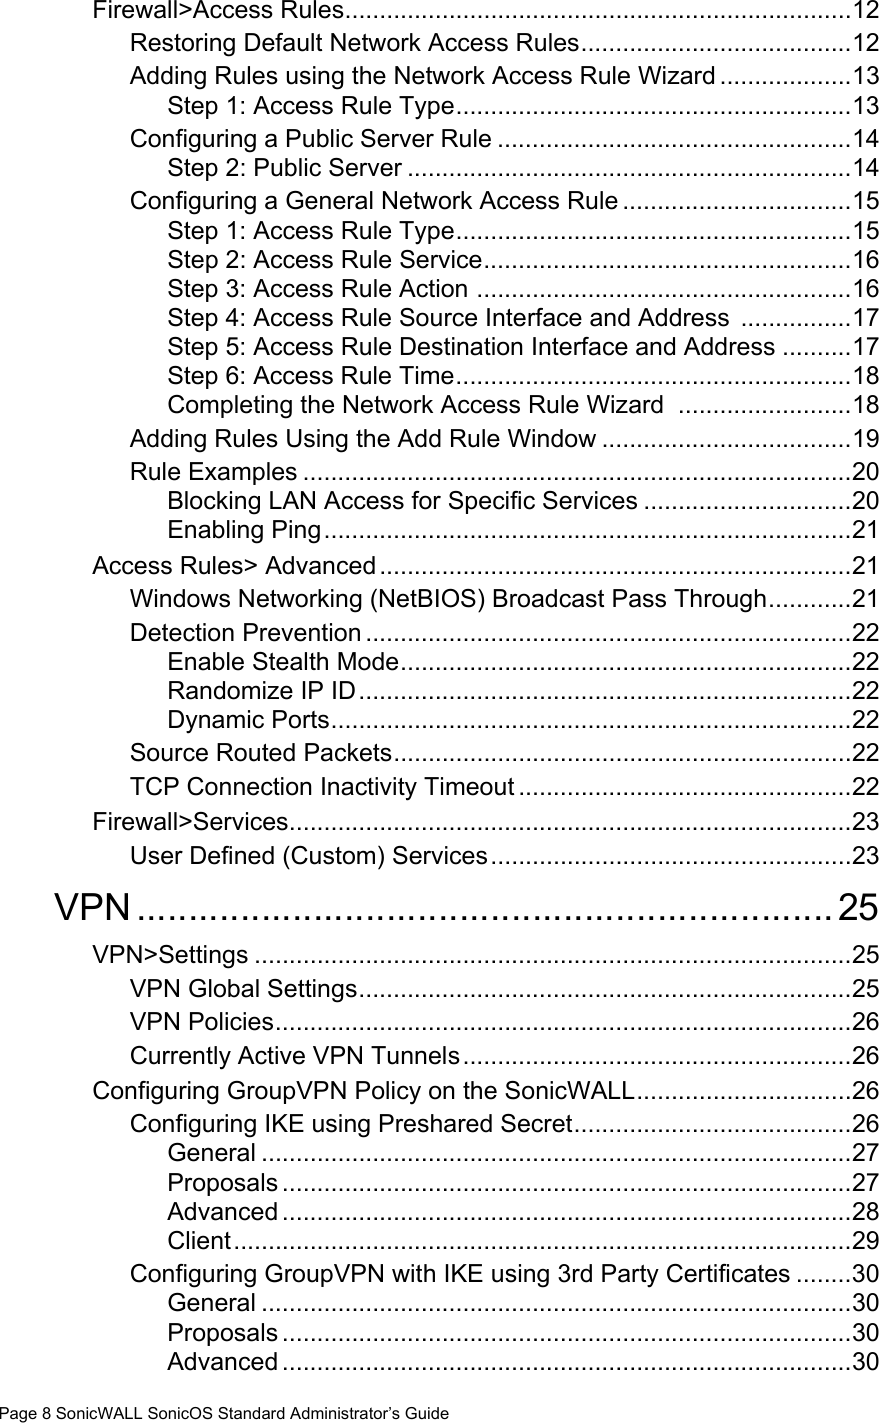 Page 8 SonicWALL SonicOS Standard Administrator’s GuideFirewall&gt;Access Rules.........................................................................12Restoring Default Network Access Rules.......................................12Adding Rules using the Network Access Rule Wizard ...................13Step 1: Access Rule Type.........................................................13Configuring a Public Server Rule ...................................................14Step 2: Public Server ................................................................14Configuring a General Network Access Rule .................................15Step 1: Access Rule Type.........................................................15Step 2: Access Rule Service.....................................................16Step 3: Access Rule Action ......................................................16Step 4: Access Rule Source Interface and Address  ................17Step 5: Access Rule Destination Interface and Address ..........17Step 6: Access Rule Time.........................................................18Completing the Network Access Rule Wizard  .........................18Adding Rules Using the Add Rule Window ....................................19Rule Examples ...............................................................................20Blocking LAN Access for Specific Services ..............................20Enabling Ping............................................................................21Access Rules&gt; Advanced....................................................................21Windows Networking (NetBIOS) Broadcast Pass Through............21Detection Prevention ......................................................................22Enable Stealth Mode.................................................................22Randomize IP ID.......................................................................22Dynamic Ports...........................................................................22Source Routed Packets..................................................................22TCP Connection Inactivity Timeout ................................................22Firewall&gt;Services.................................................................................23User Defined (Custom) Services....................................................23VPN................................................................... 25VPN&gt;Settings ......................................................................................25VPN Global Settings.......................................................................25VPN Policies...................................................................................26Currently Active VPN Tunnels........................................................26Configuring GroupVPN Policy on the SonicWALL...............................26Configuring IKE using Preshared Secret........................................26General .....................................................................................27Proposals ..................................................................................27Advanced ..................................................................................28Client.........................................................................................29Configuring GroupVPN with IKE using 3rd Party Certificates ........30General .....................................................................................30Proposals ..................................................................................30Advanced ..................................................................................30